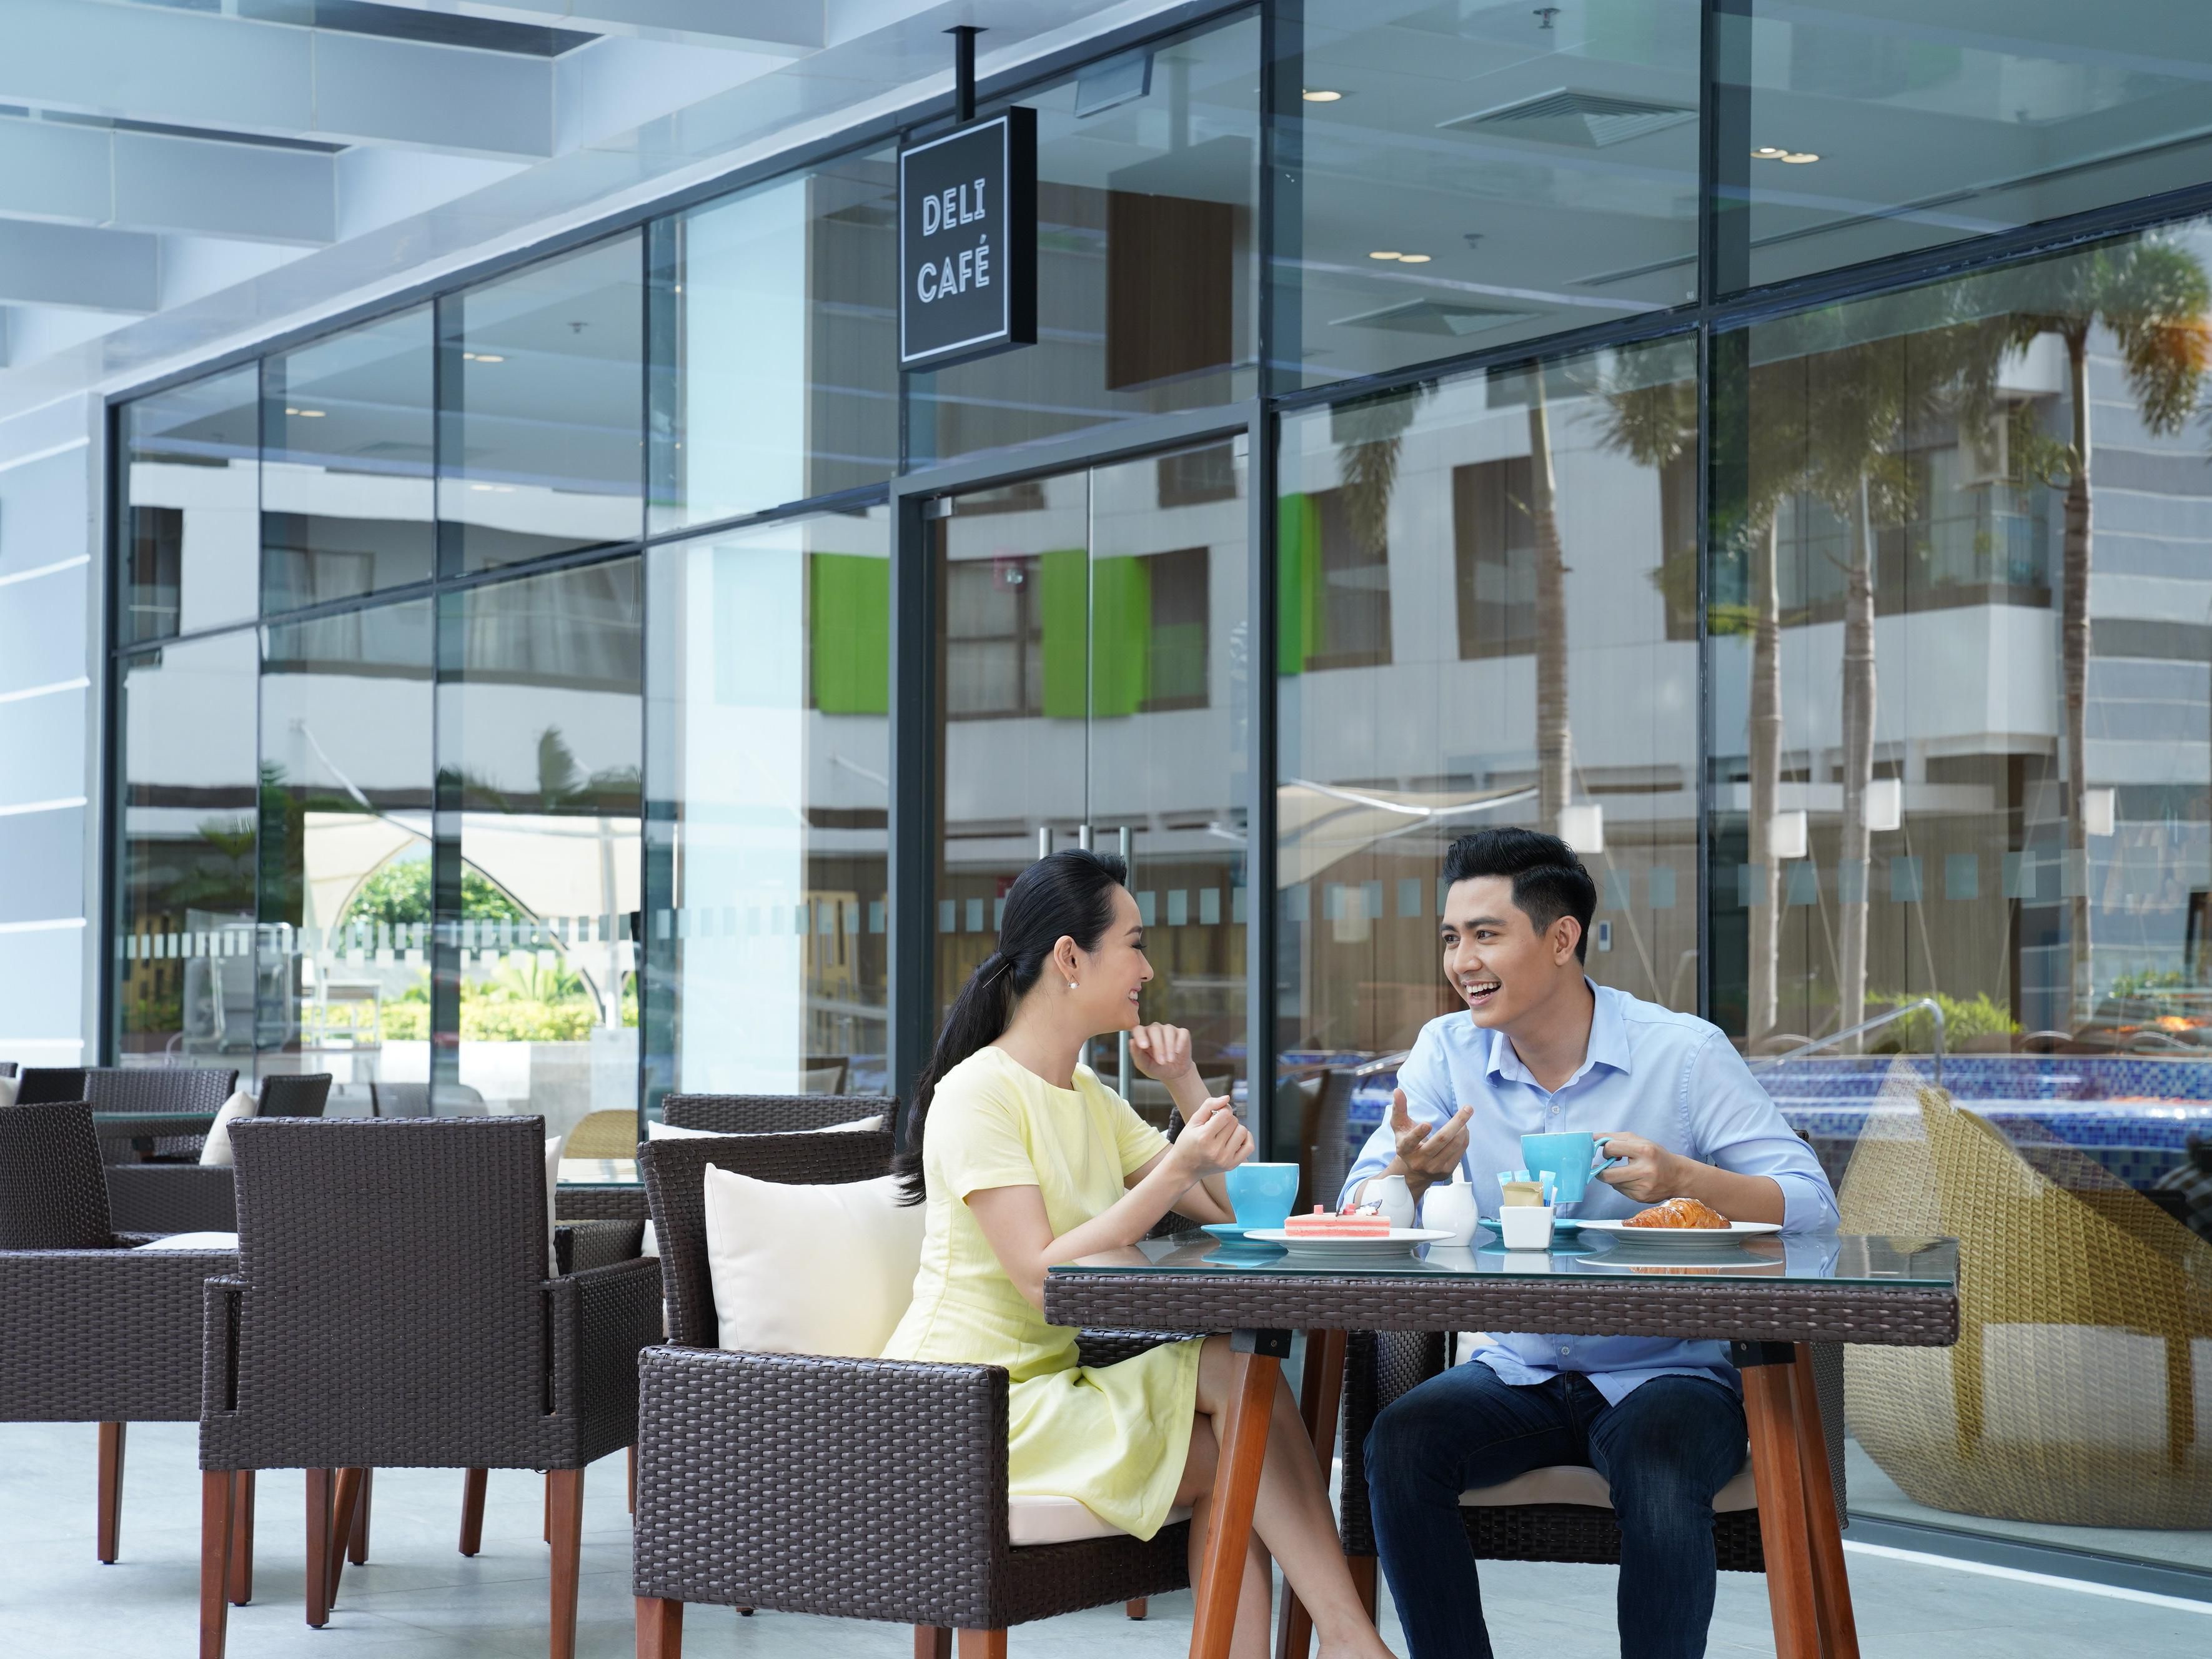 Savour the best of both international and local cuisines in a relaxed atmosphere at our all-day dining Deli Cafe with a serene view over the Olympic-size pool and lush green garden.